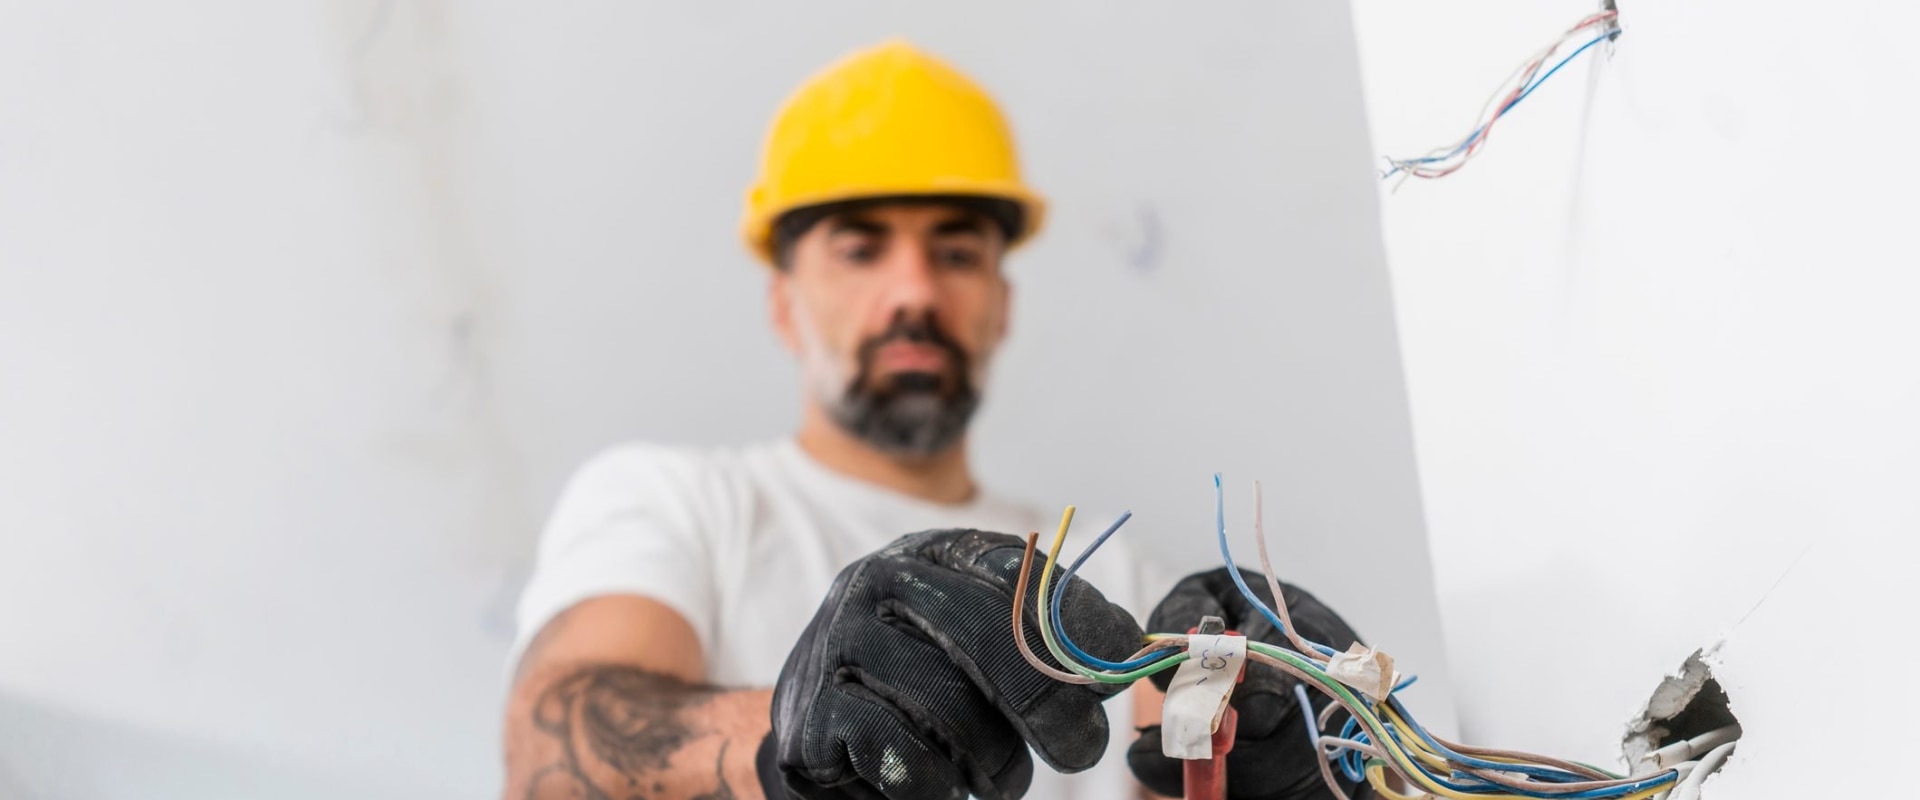 Can an Electrical Engineer Become an Electrician?